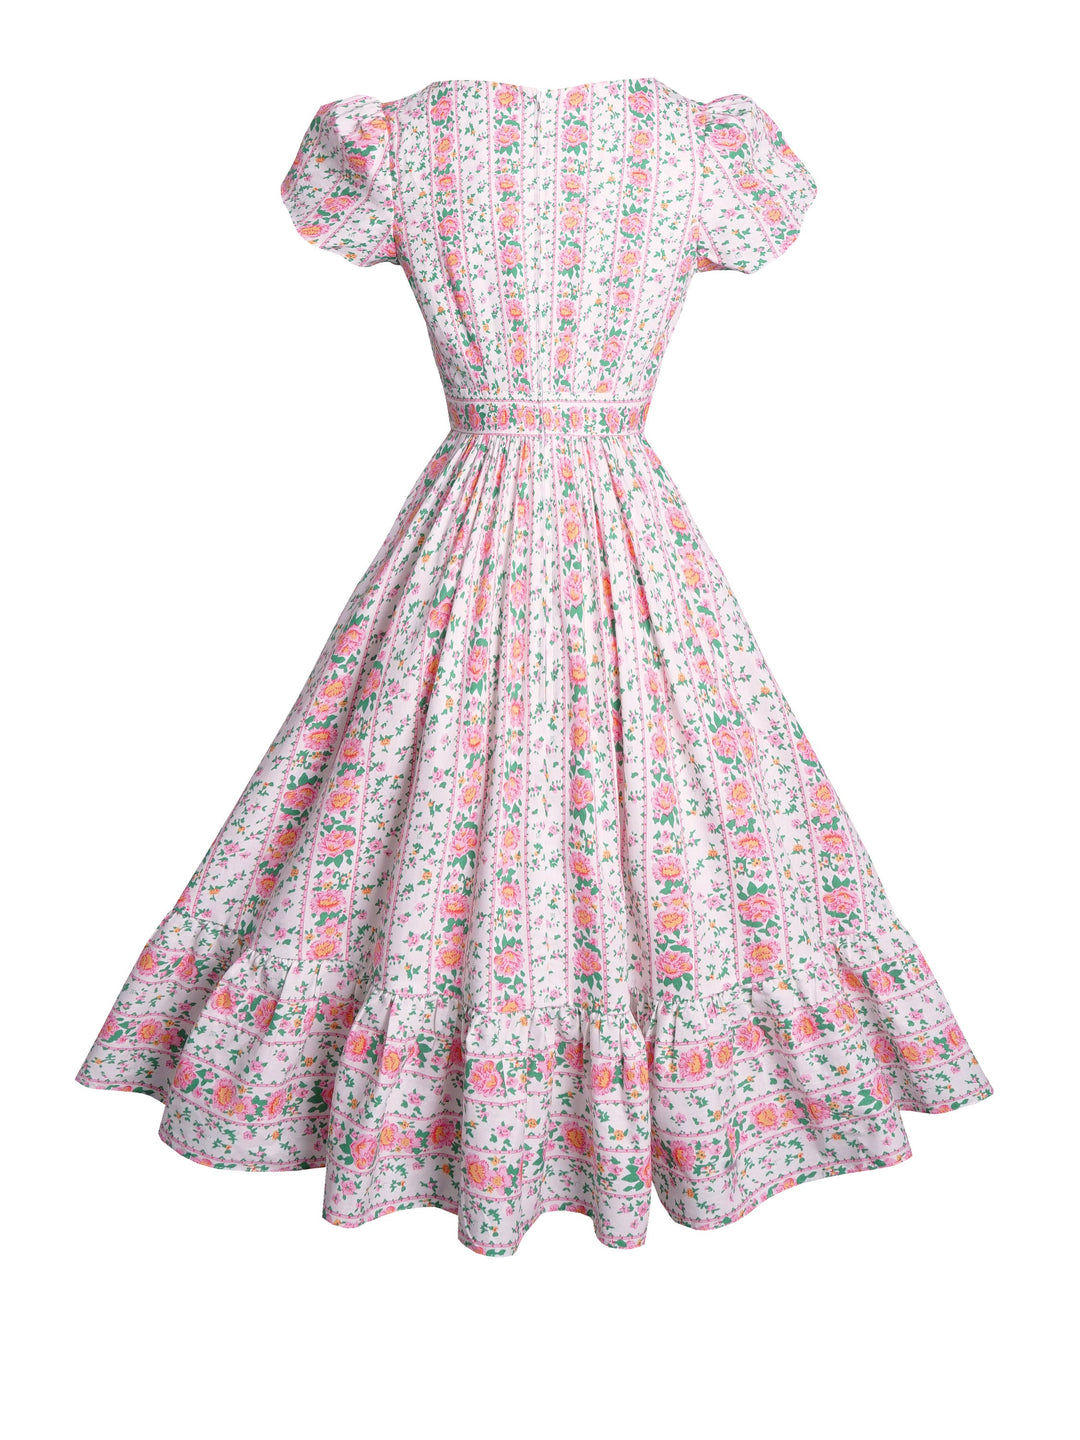 MTO - Ava Dress Pink "Country Cottage Floral"